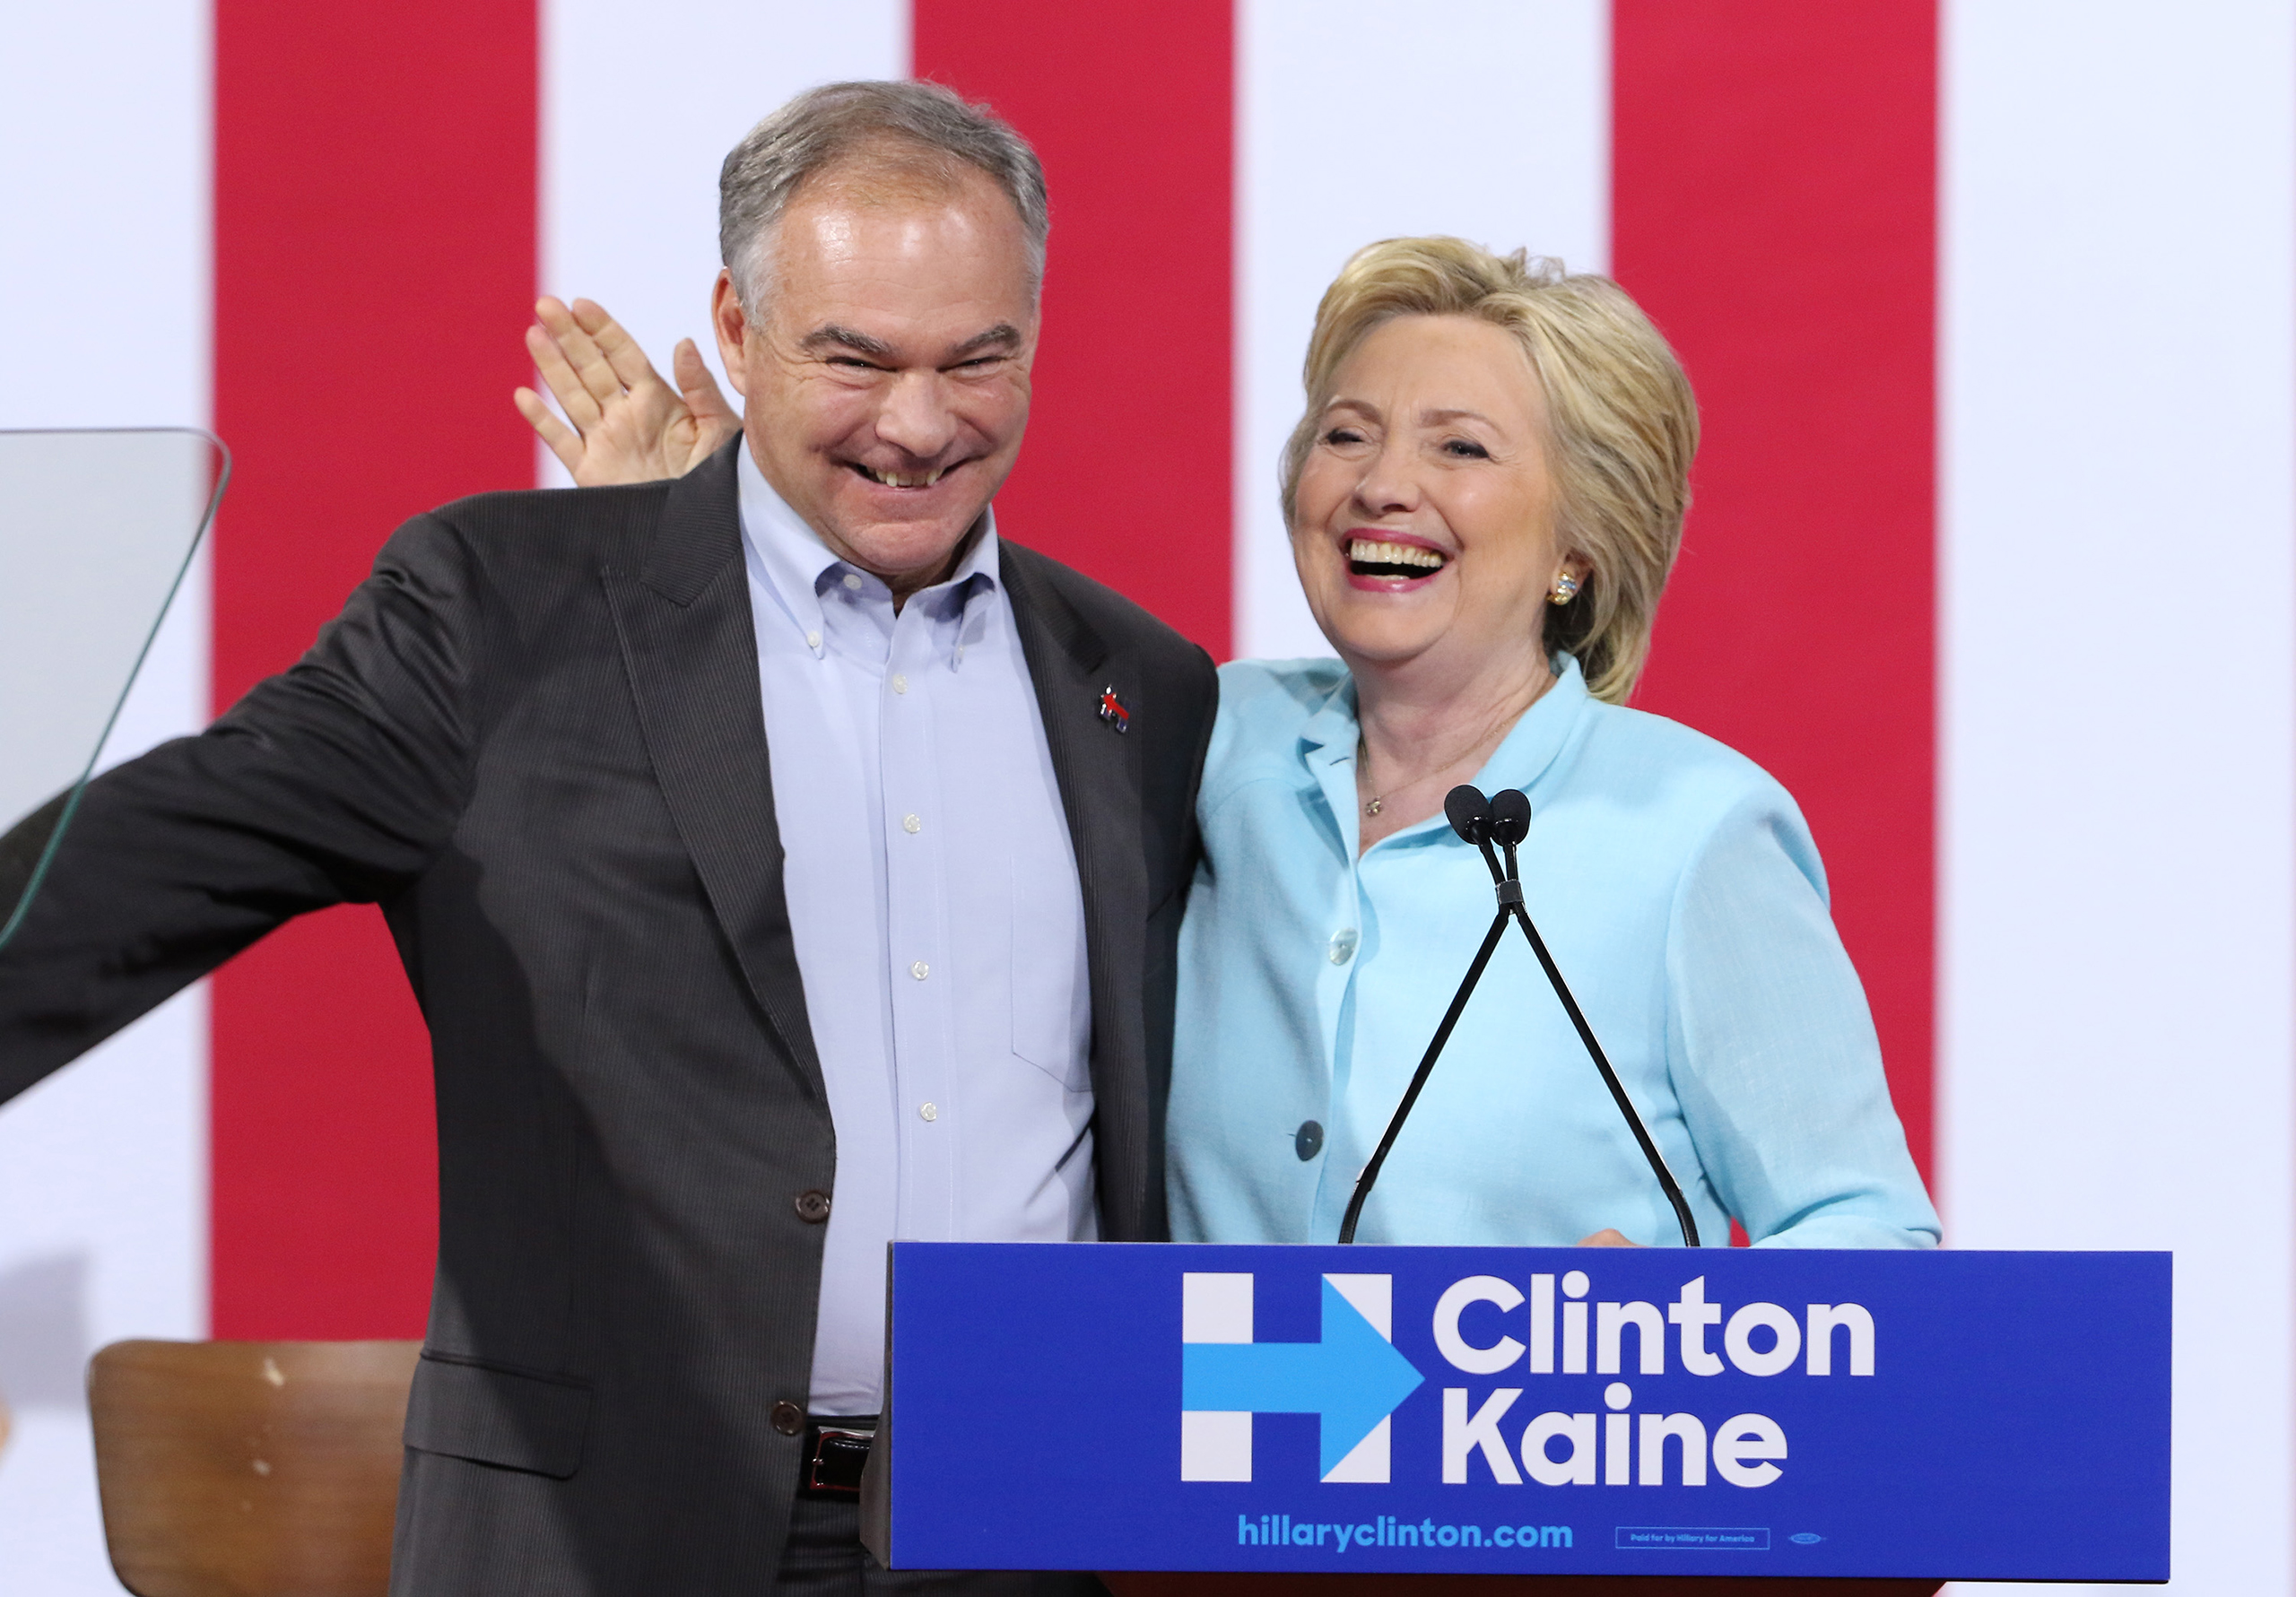 Hillary Clinton and Democratic vice presidential candidate U.S. Sen. Tim Kaine attend a campaign rally at Florida International University Panther Arena in Miami, Fla., on July 23, 2016. (Alexander Tamargo—WireImage/Getty Images)